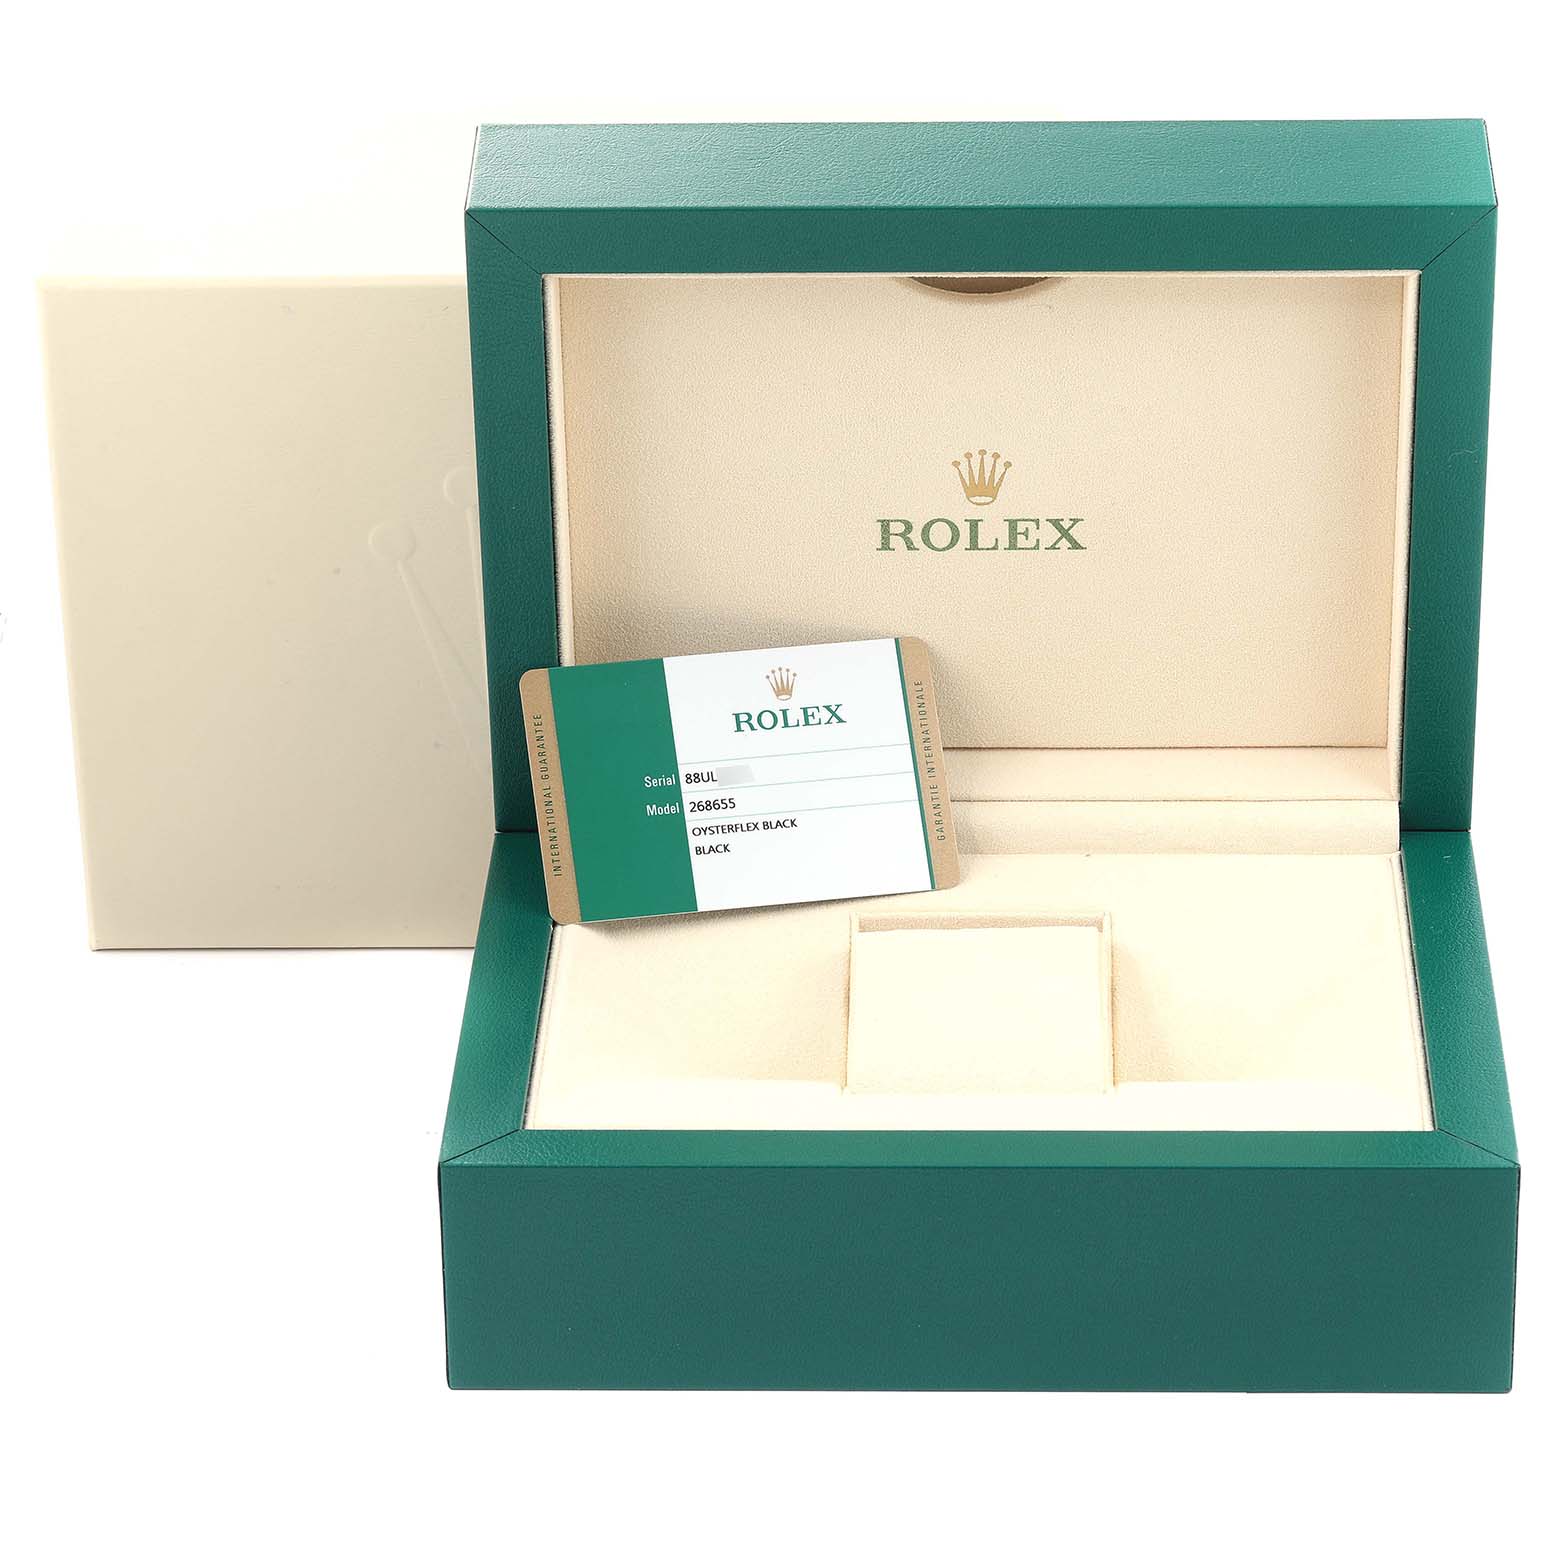 Rolex Yachtmaster 37 Rose Gold Rubber Strap Mens Watch 268655 Box Card ...